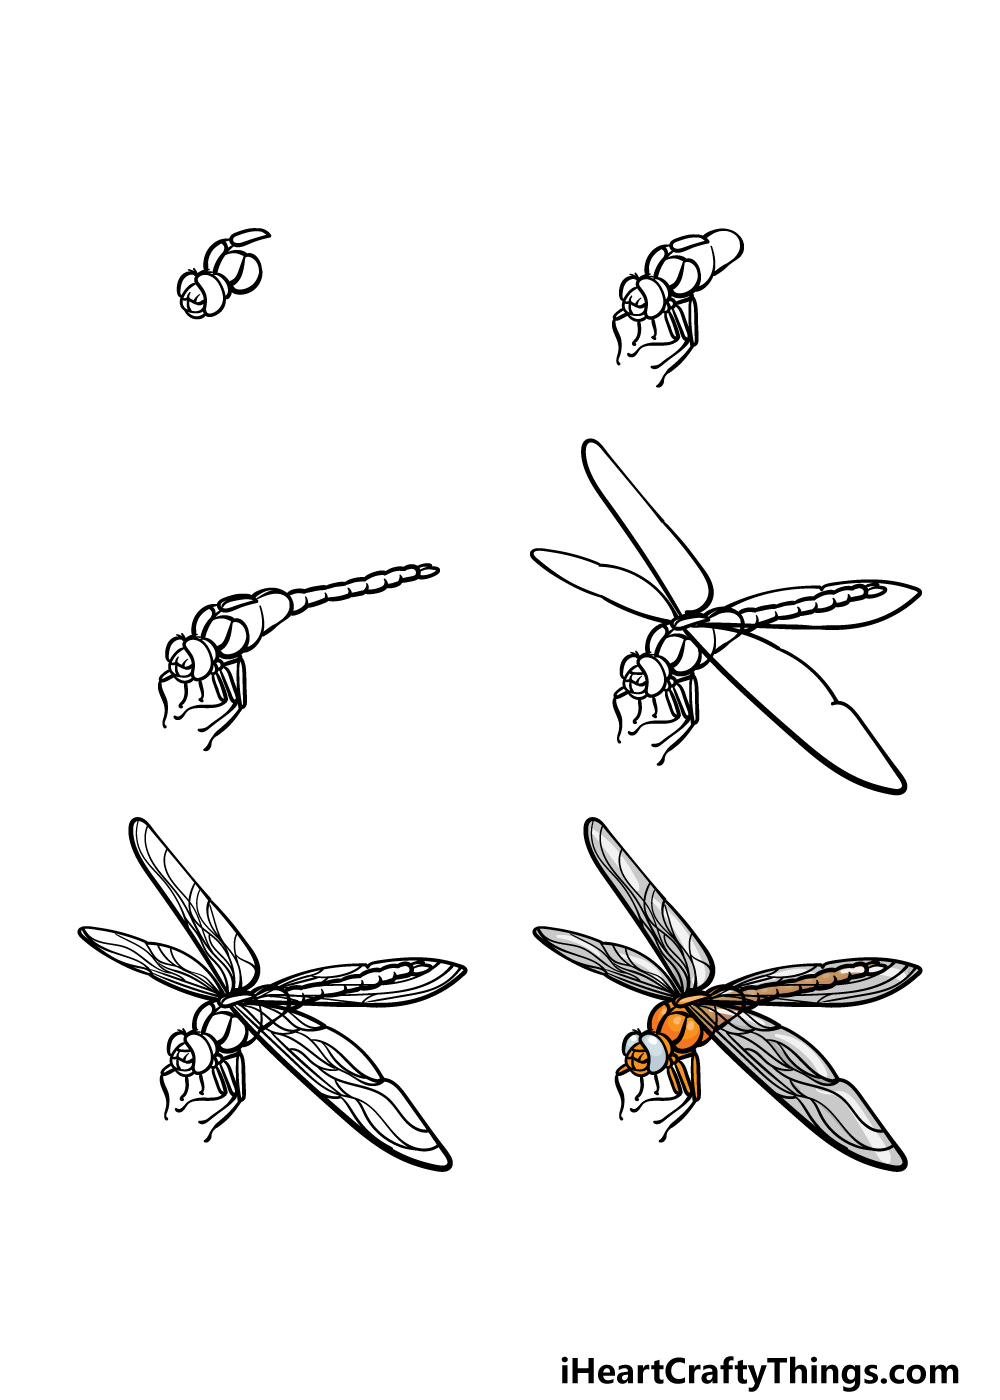 how to draw a Dragonfly in 6 steps